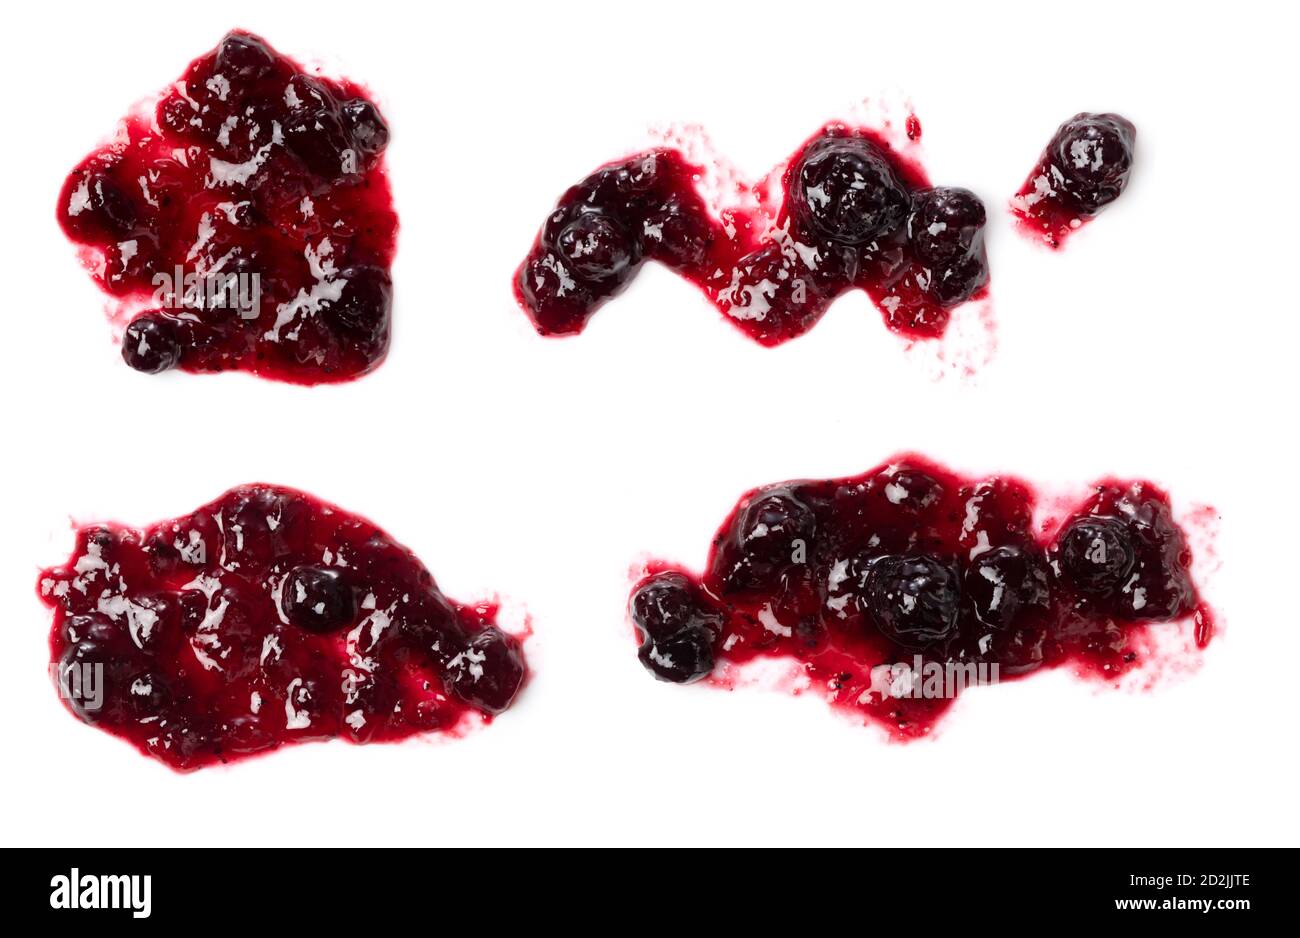 A bird's-eye view of the various shapes of blueberry jam hanging down on a white background. Stock Photo